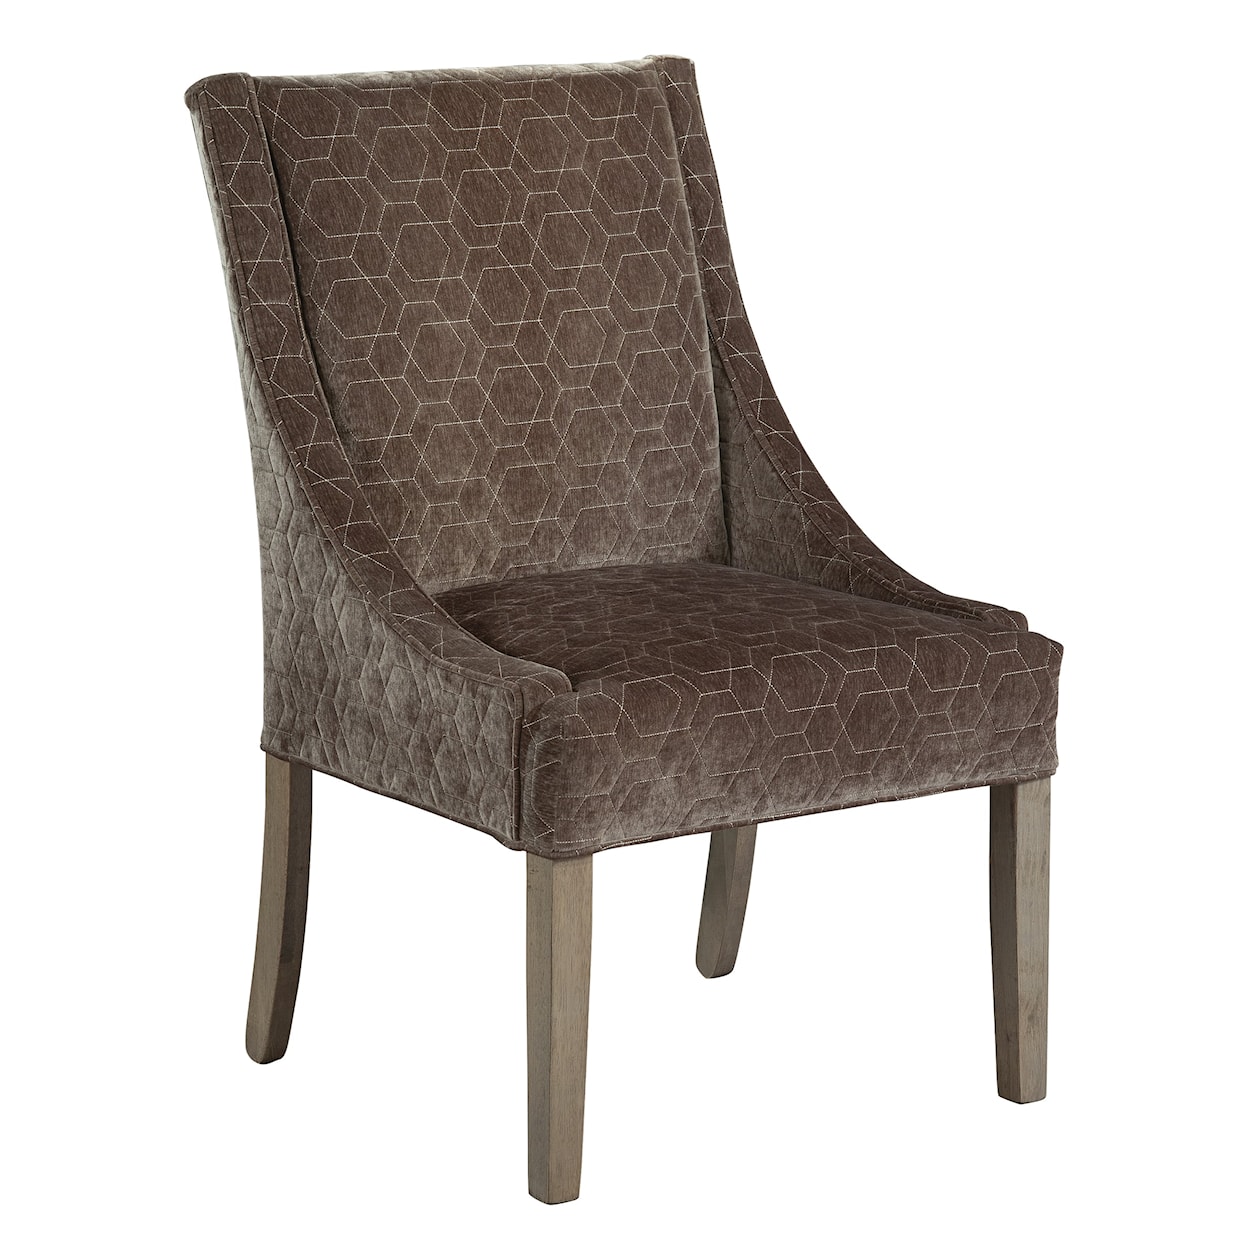 Hekman Upholstery Nathan Dining Chair